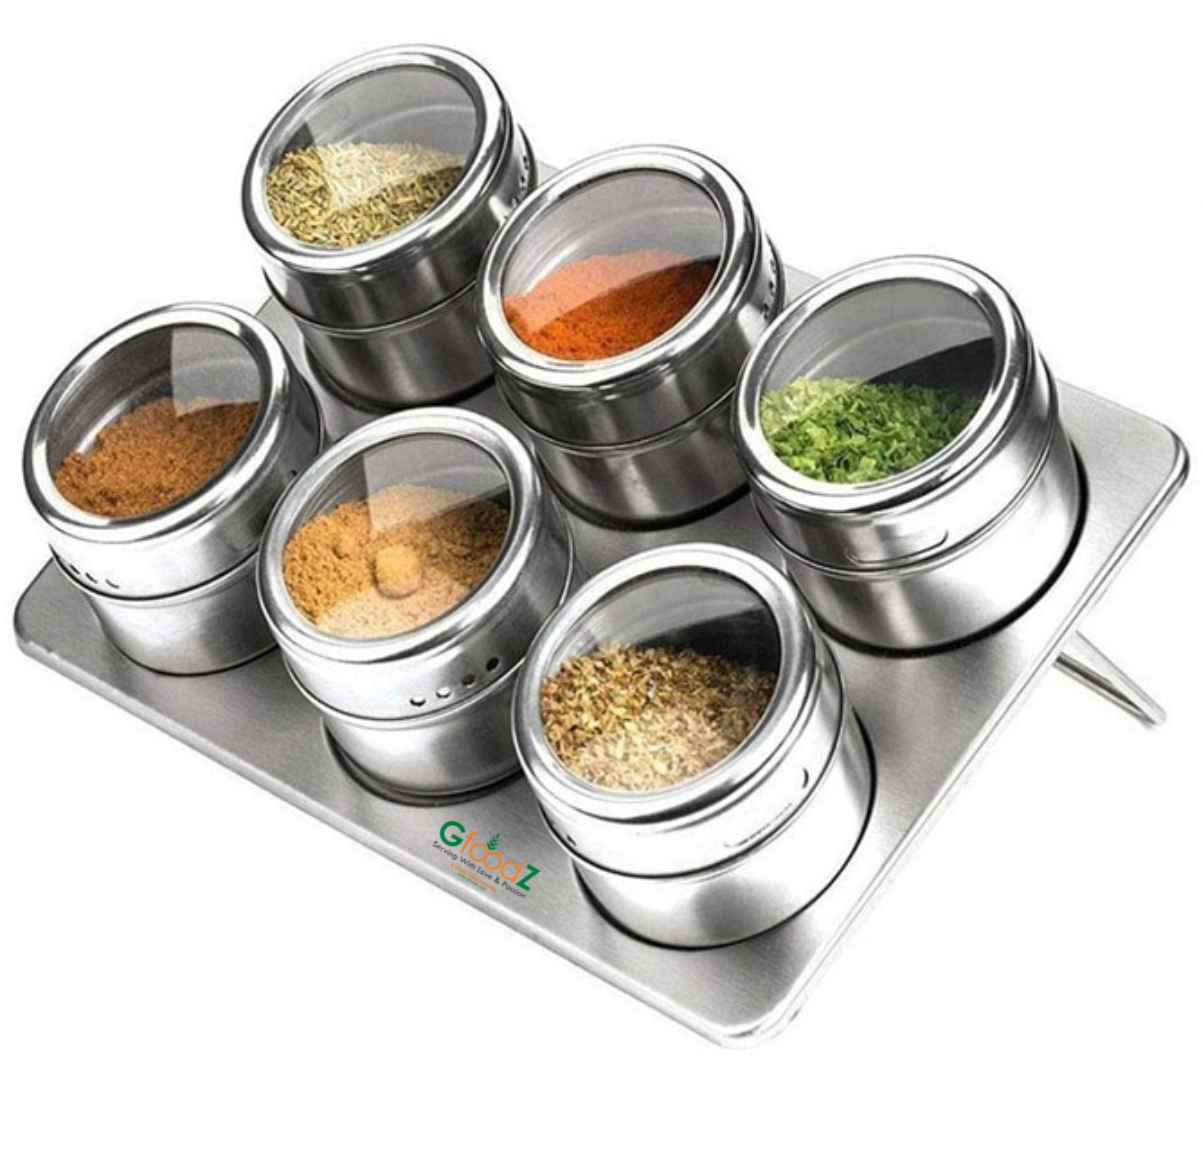 Spice It - Magnetic Spice -